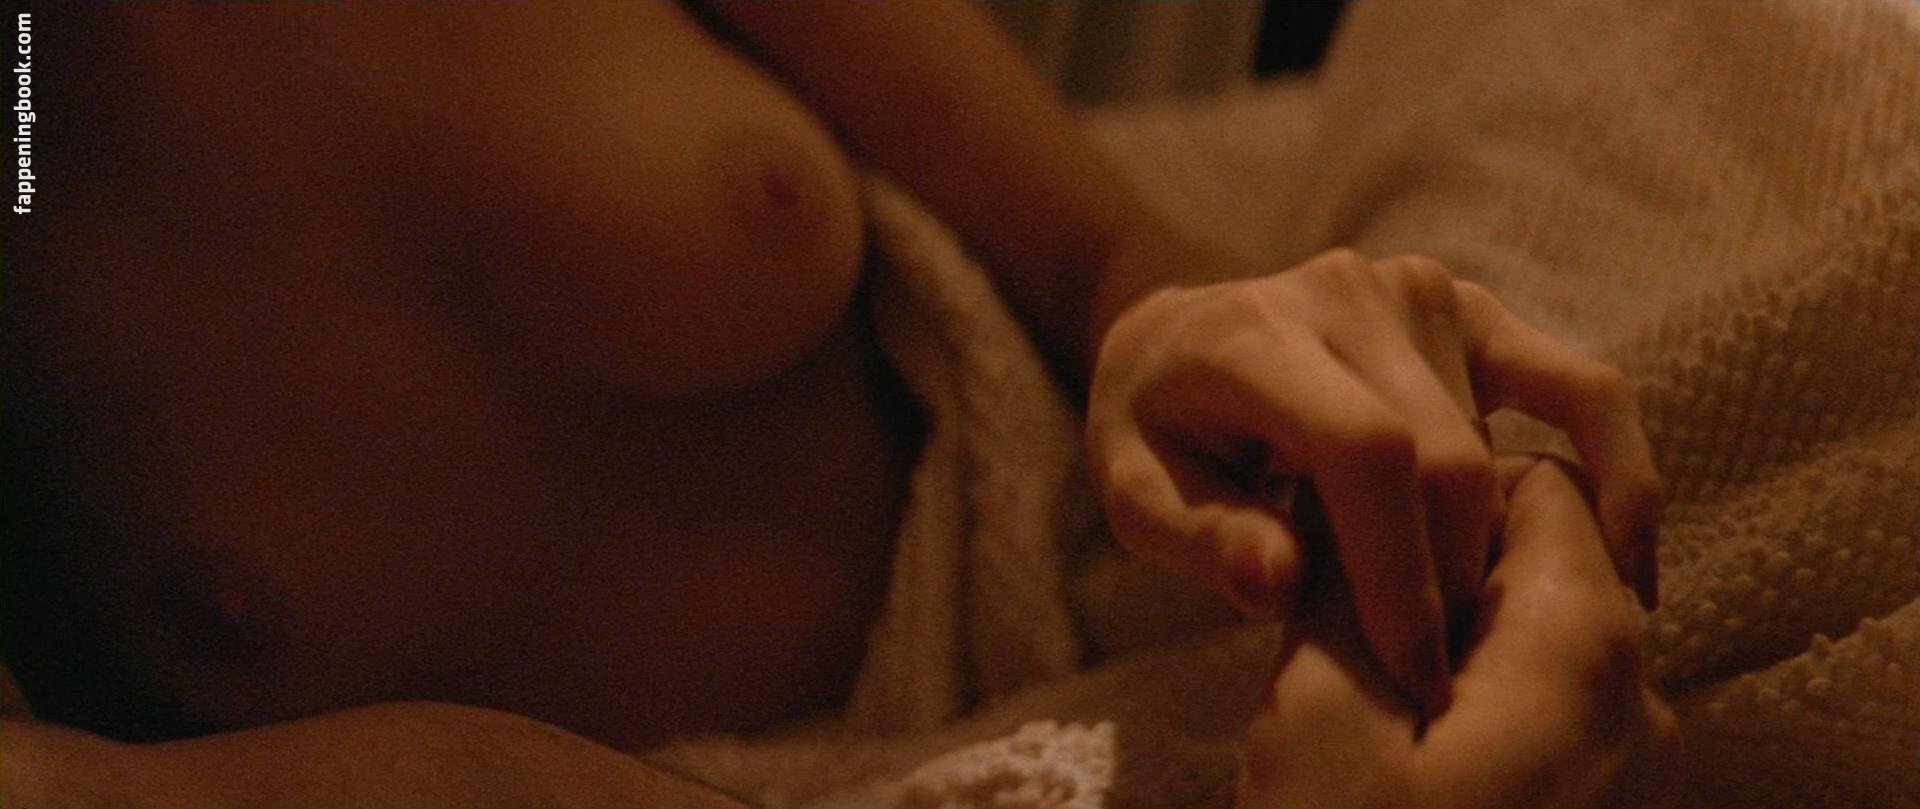 Angelina Jolie Nude, The Fappening - Photo #36481 - FappeningBook.